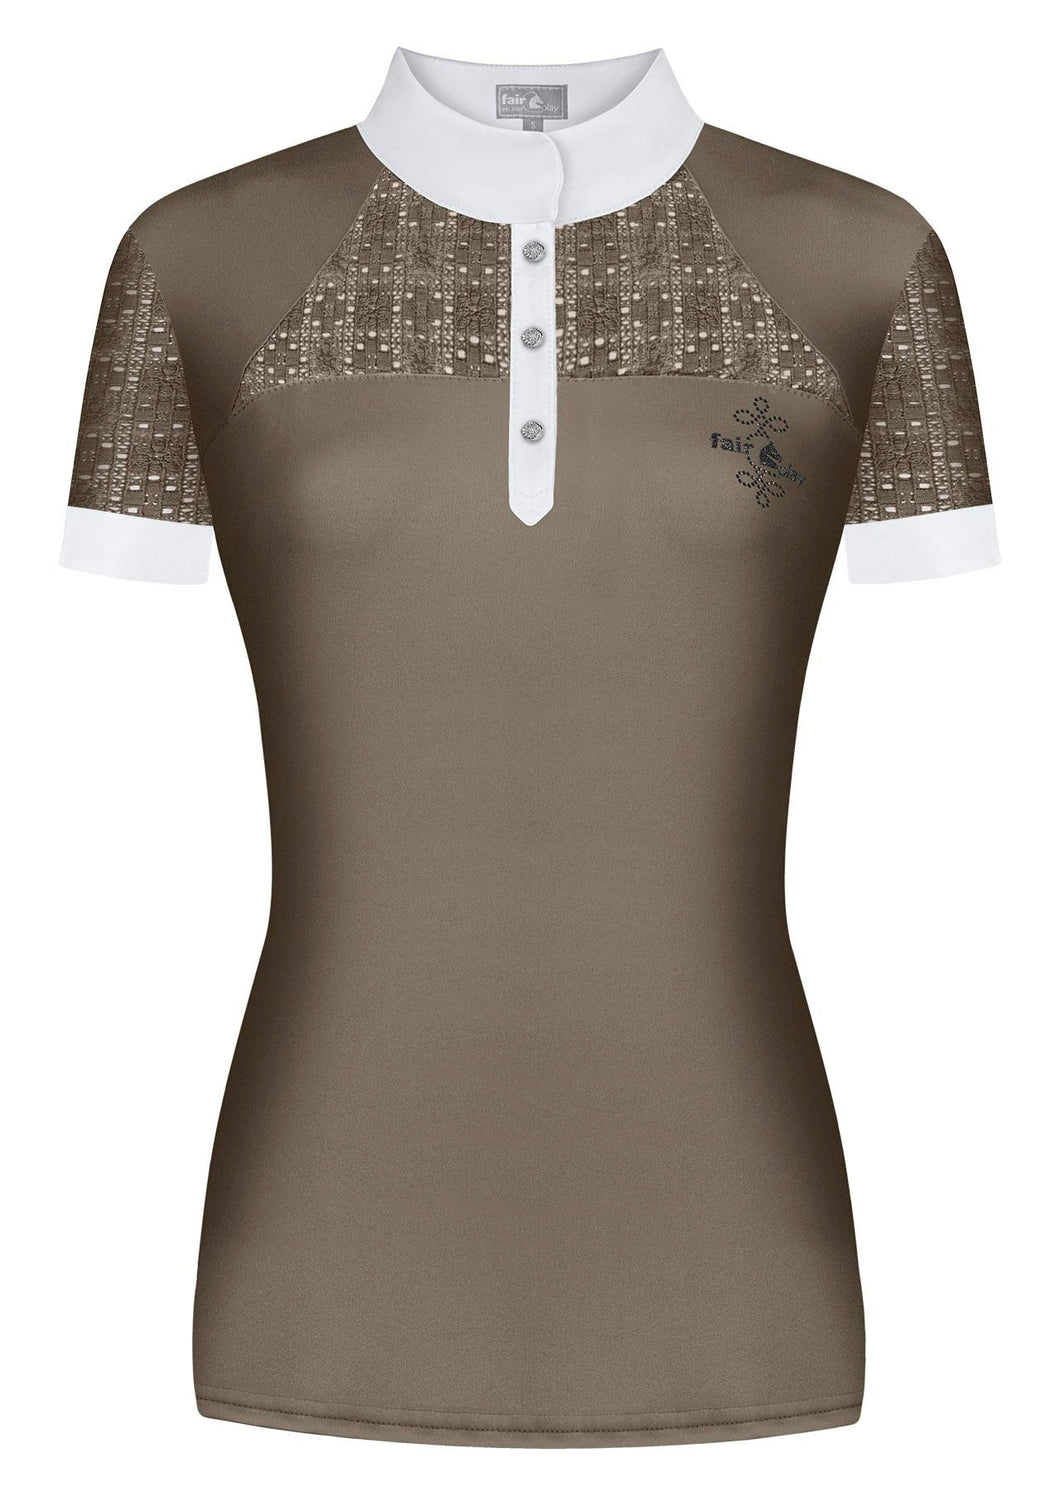 Fair Play Competition Shirt AIKO SS, Taupe Grey